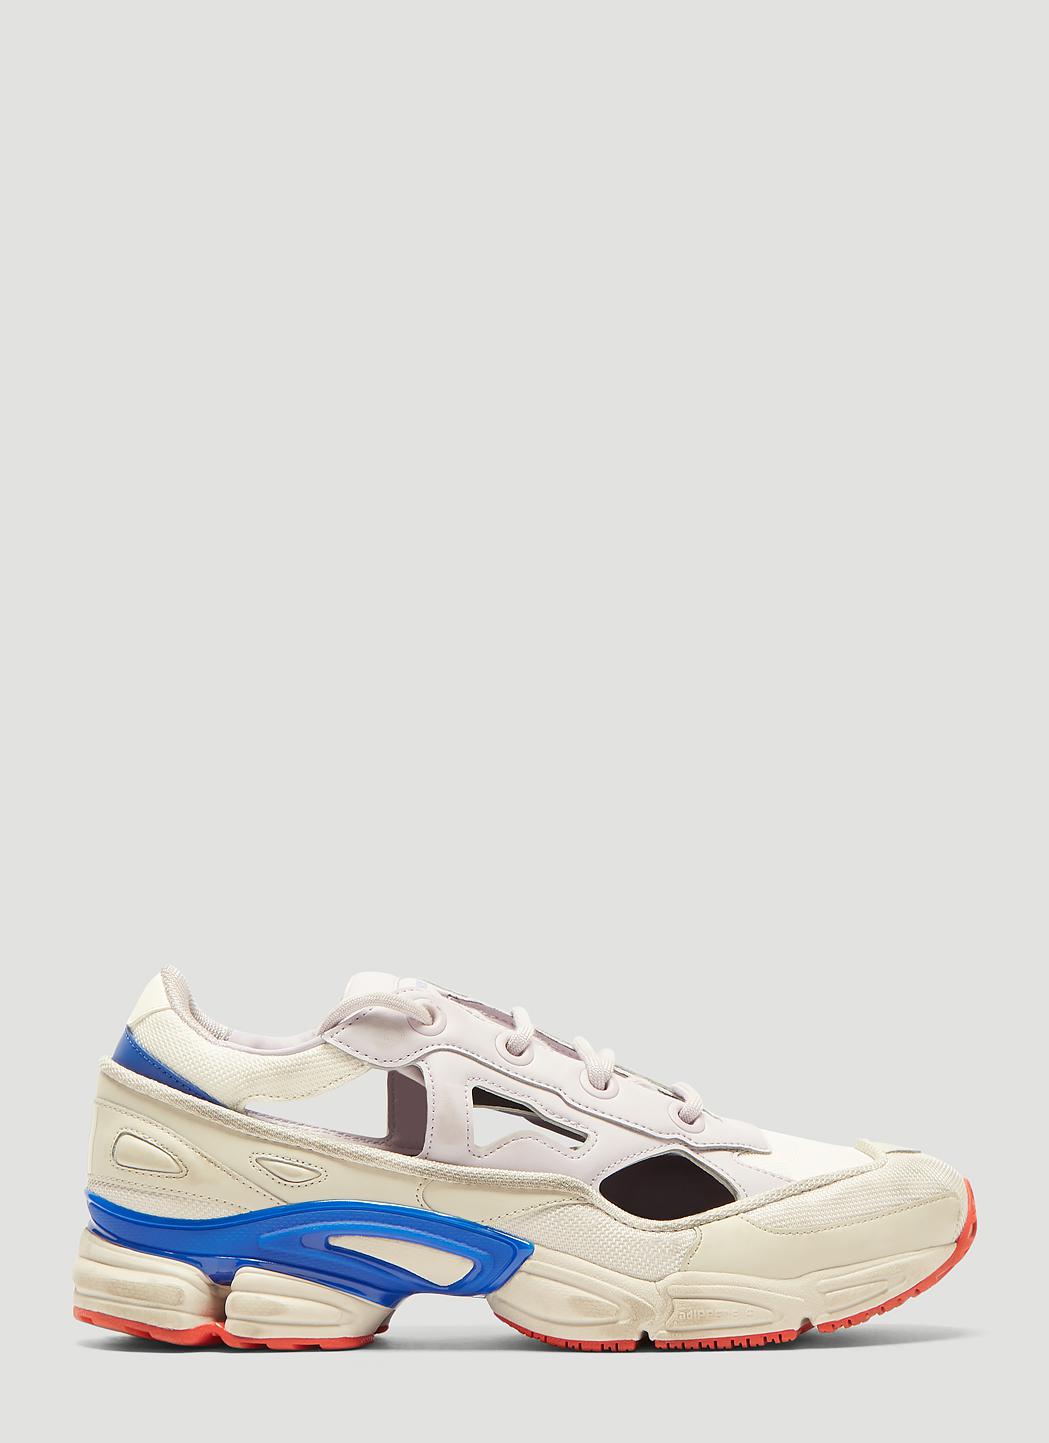 adidas By Raf Simons Replicant Ozweego Limited Edition Sneakers in ...